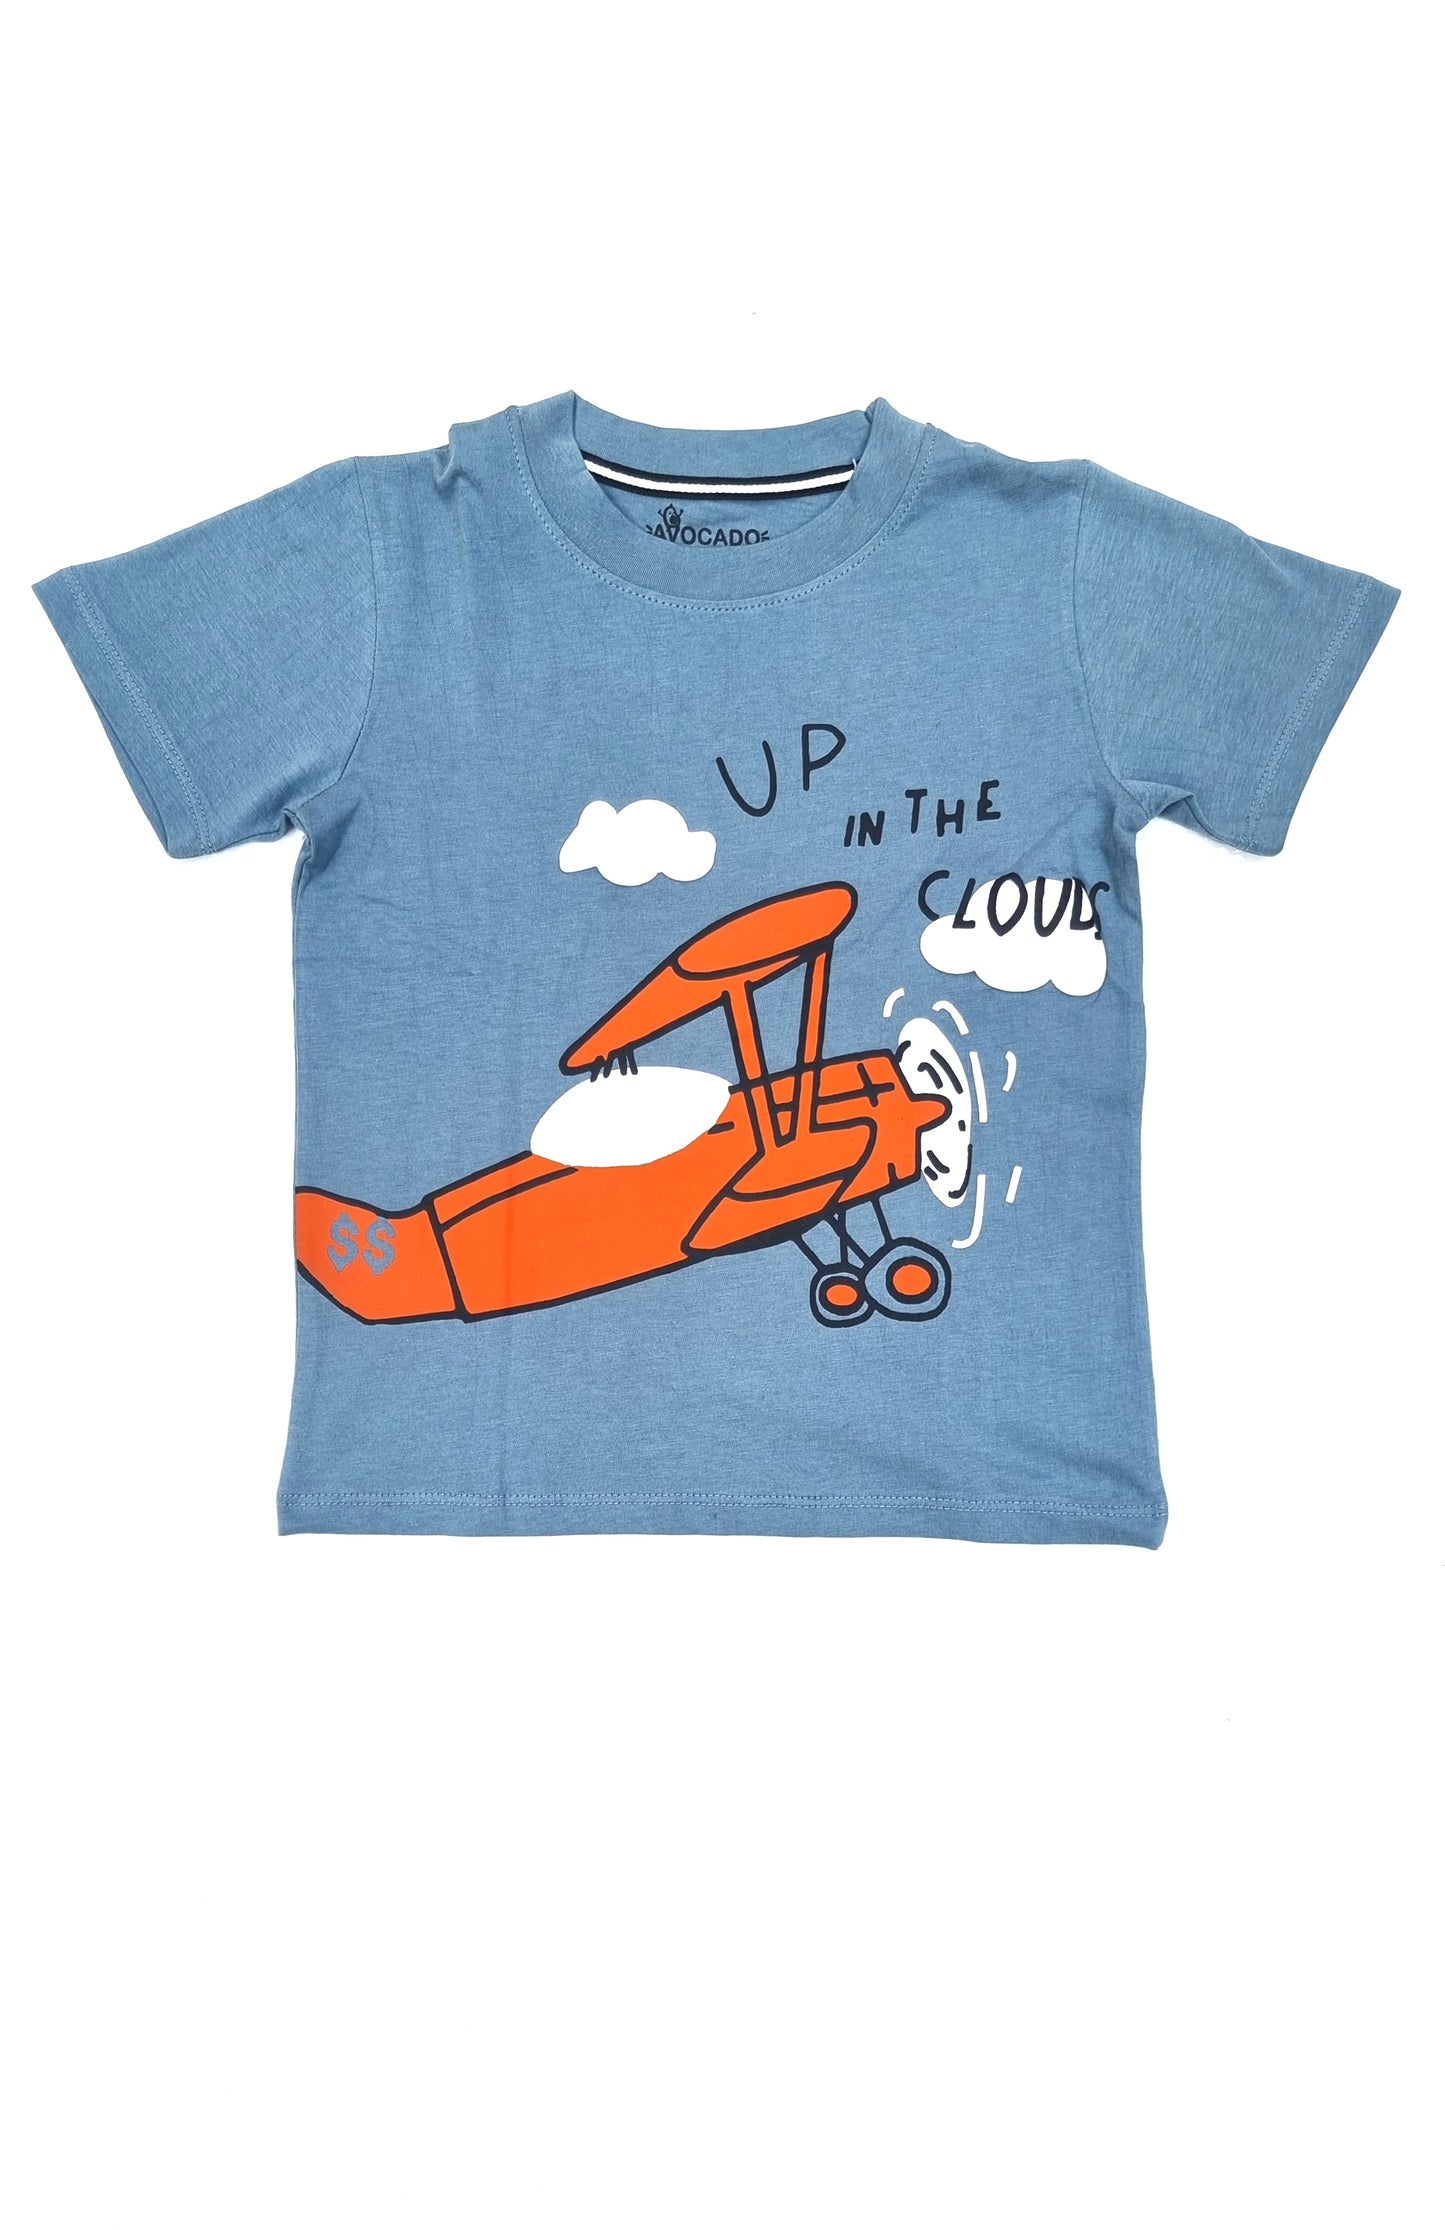 Up In Clouds Tee